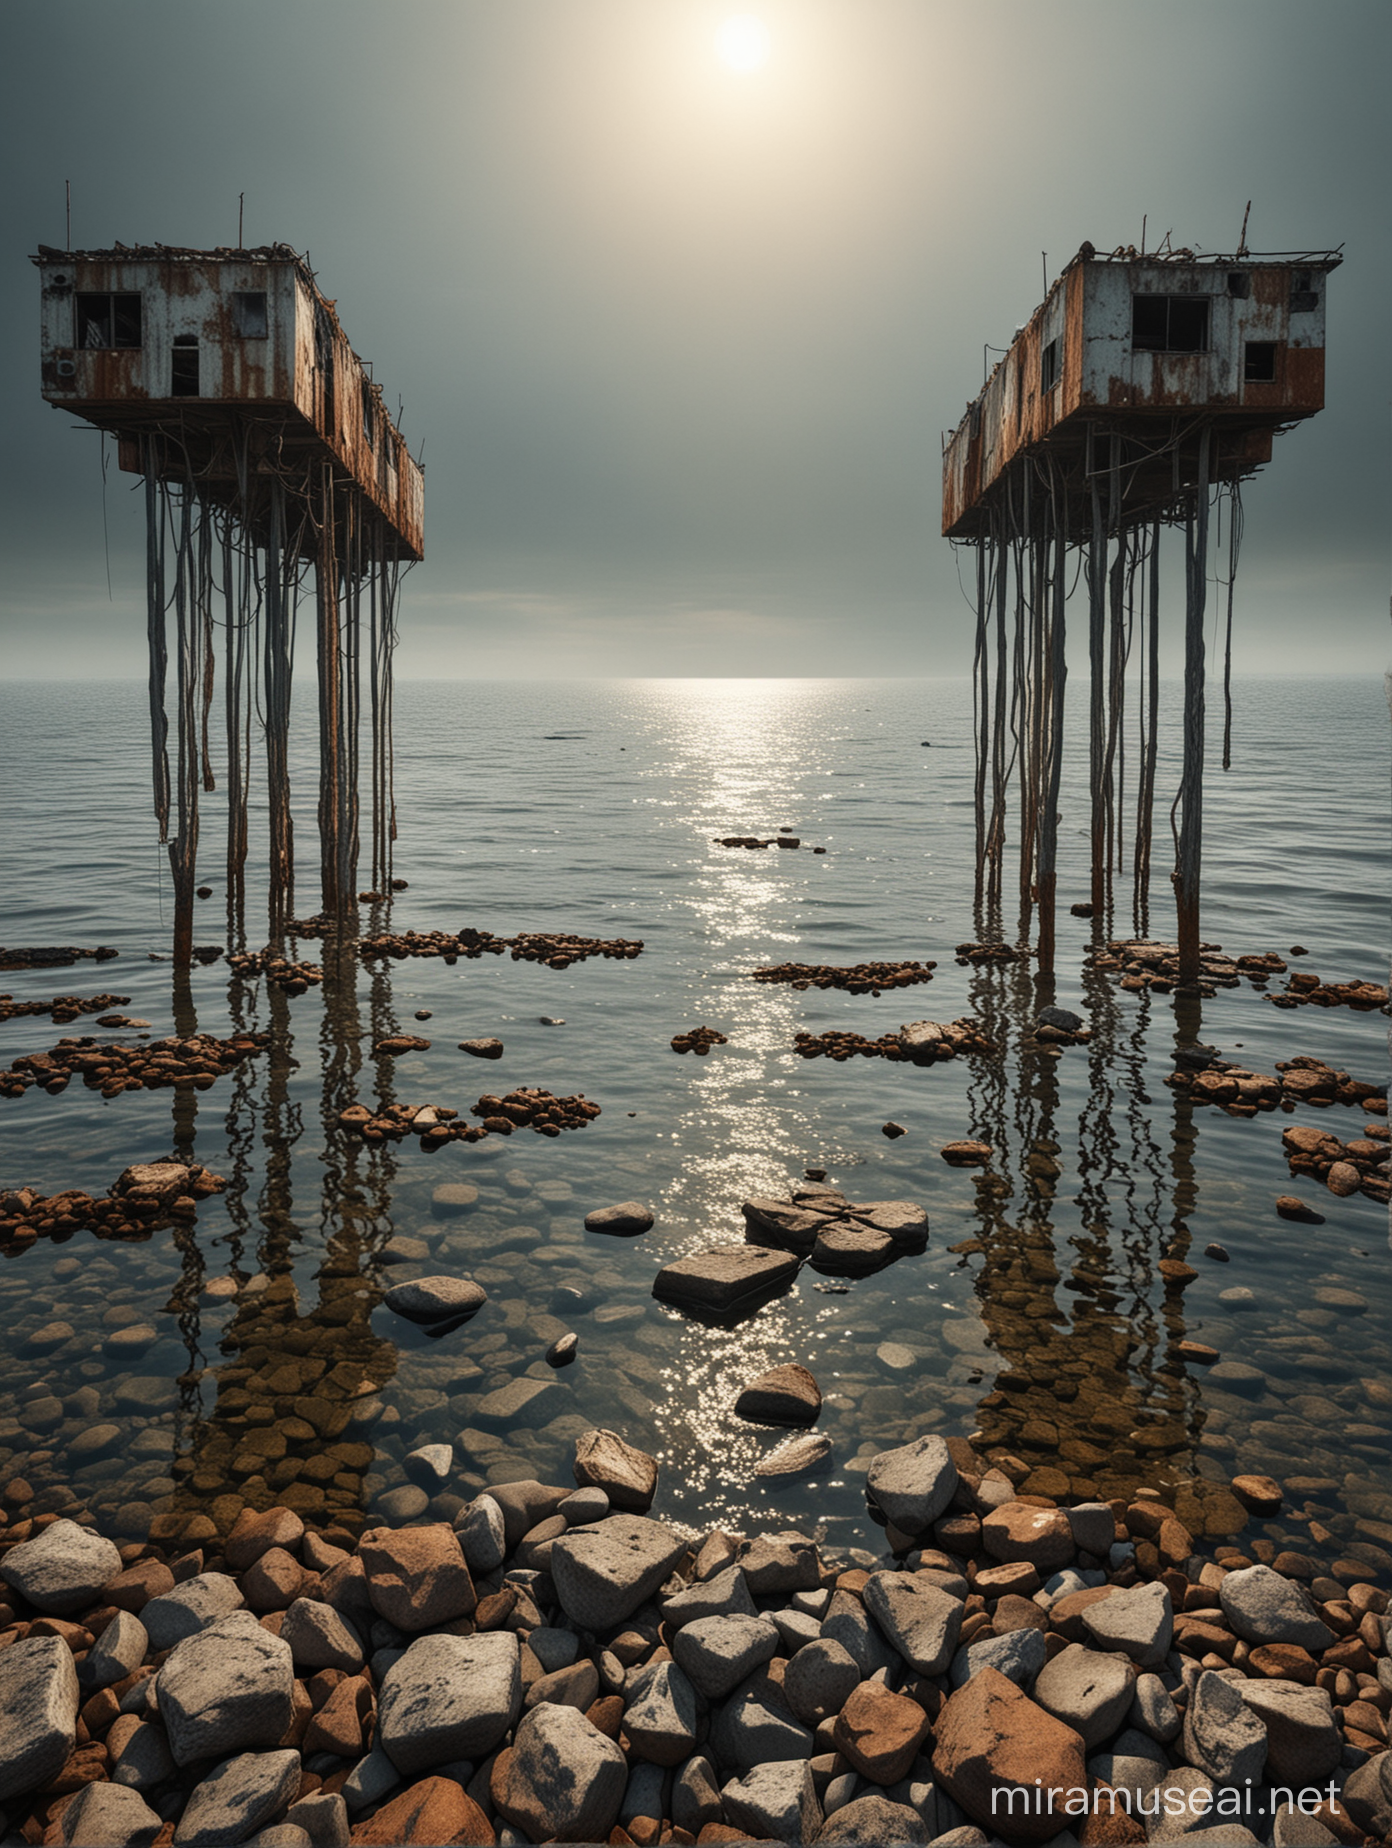 Mysterious Seaside Landscape with Abandoned Steel Structures